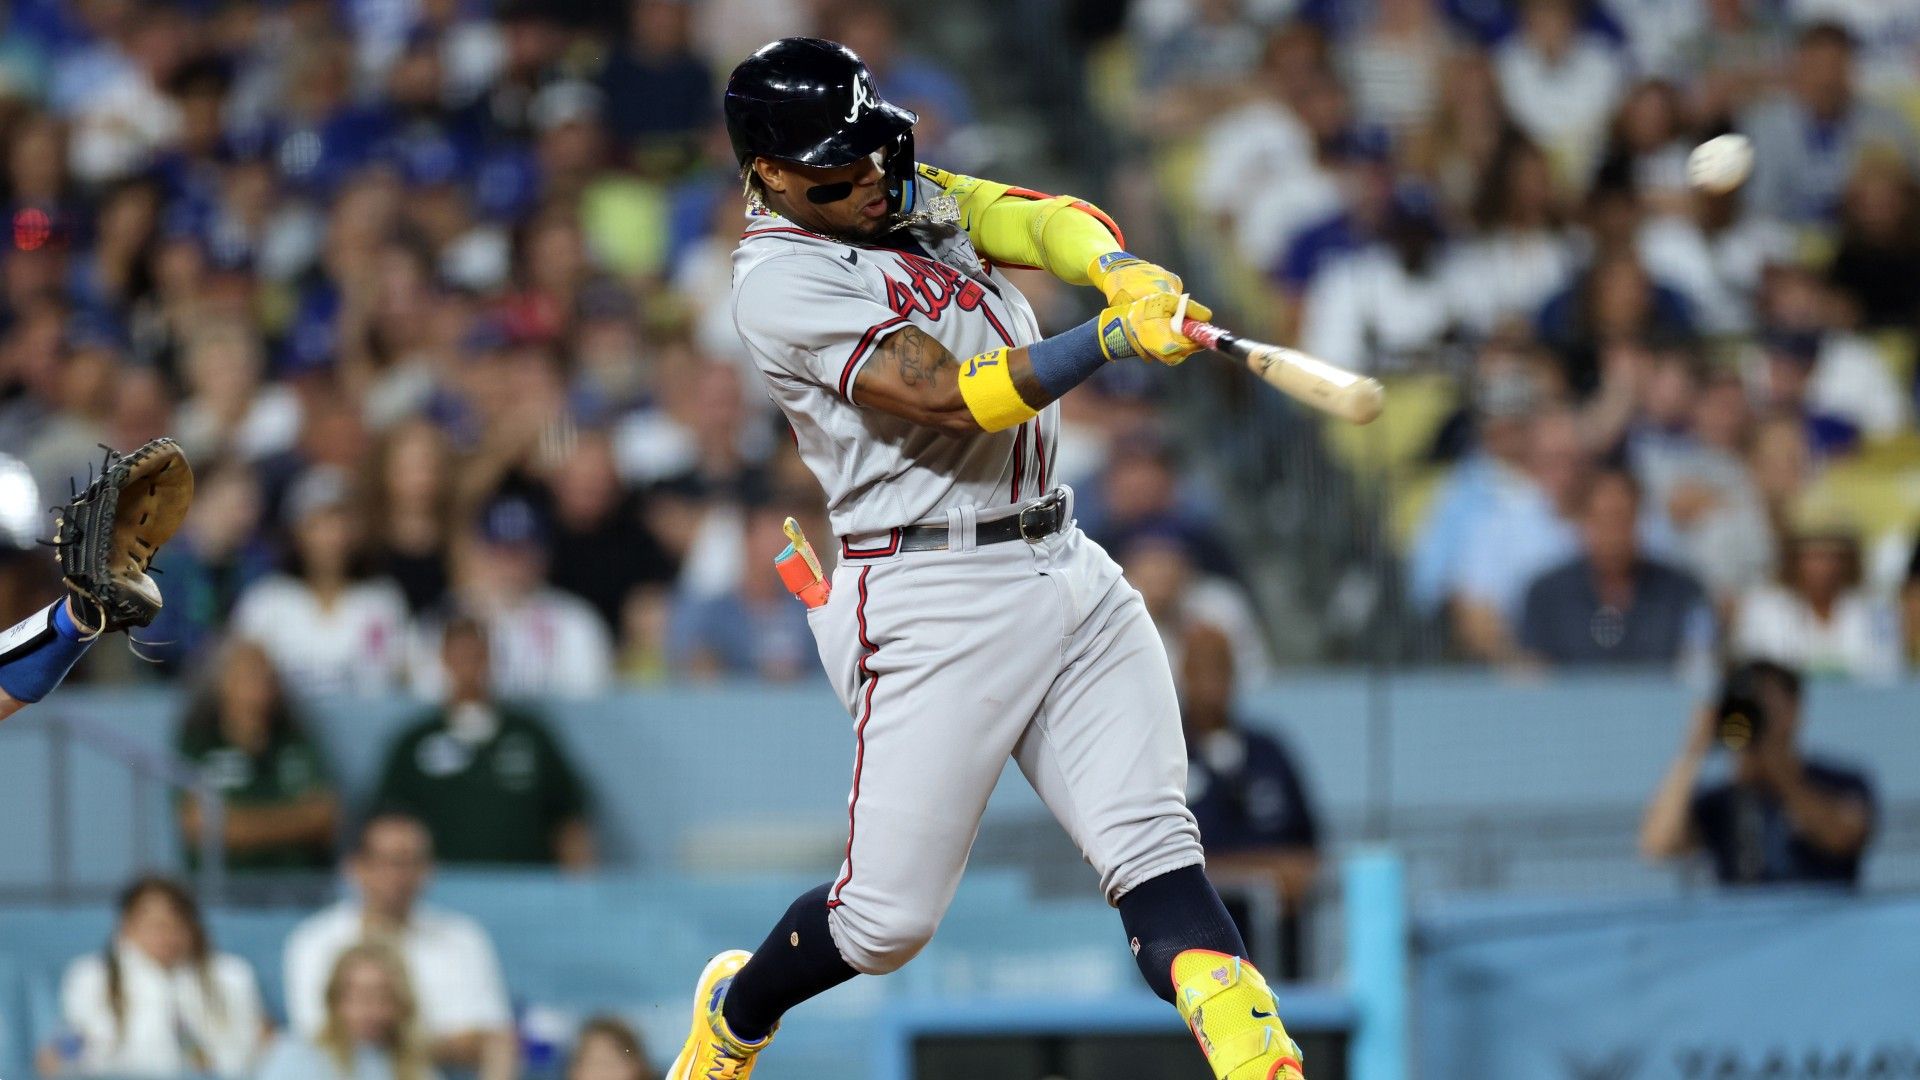 Braves' Ronald Acuna Jr. creates history in close victory against Dodgers, showcasing baseball's top talent